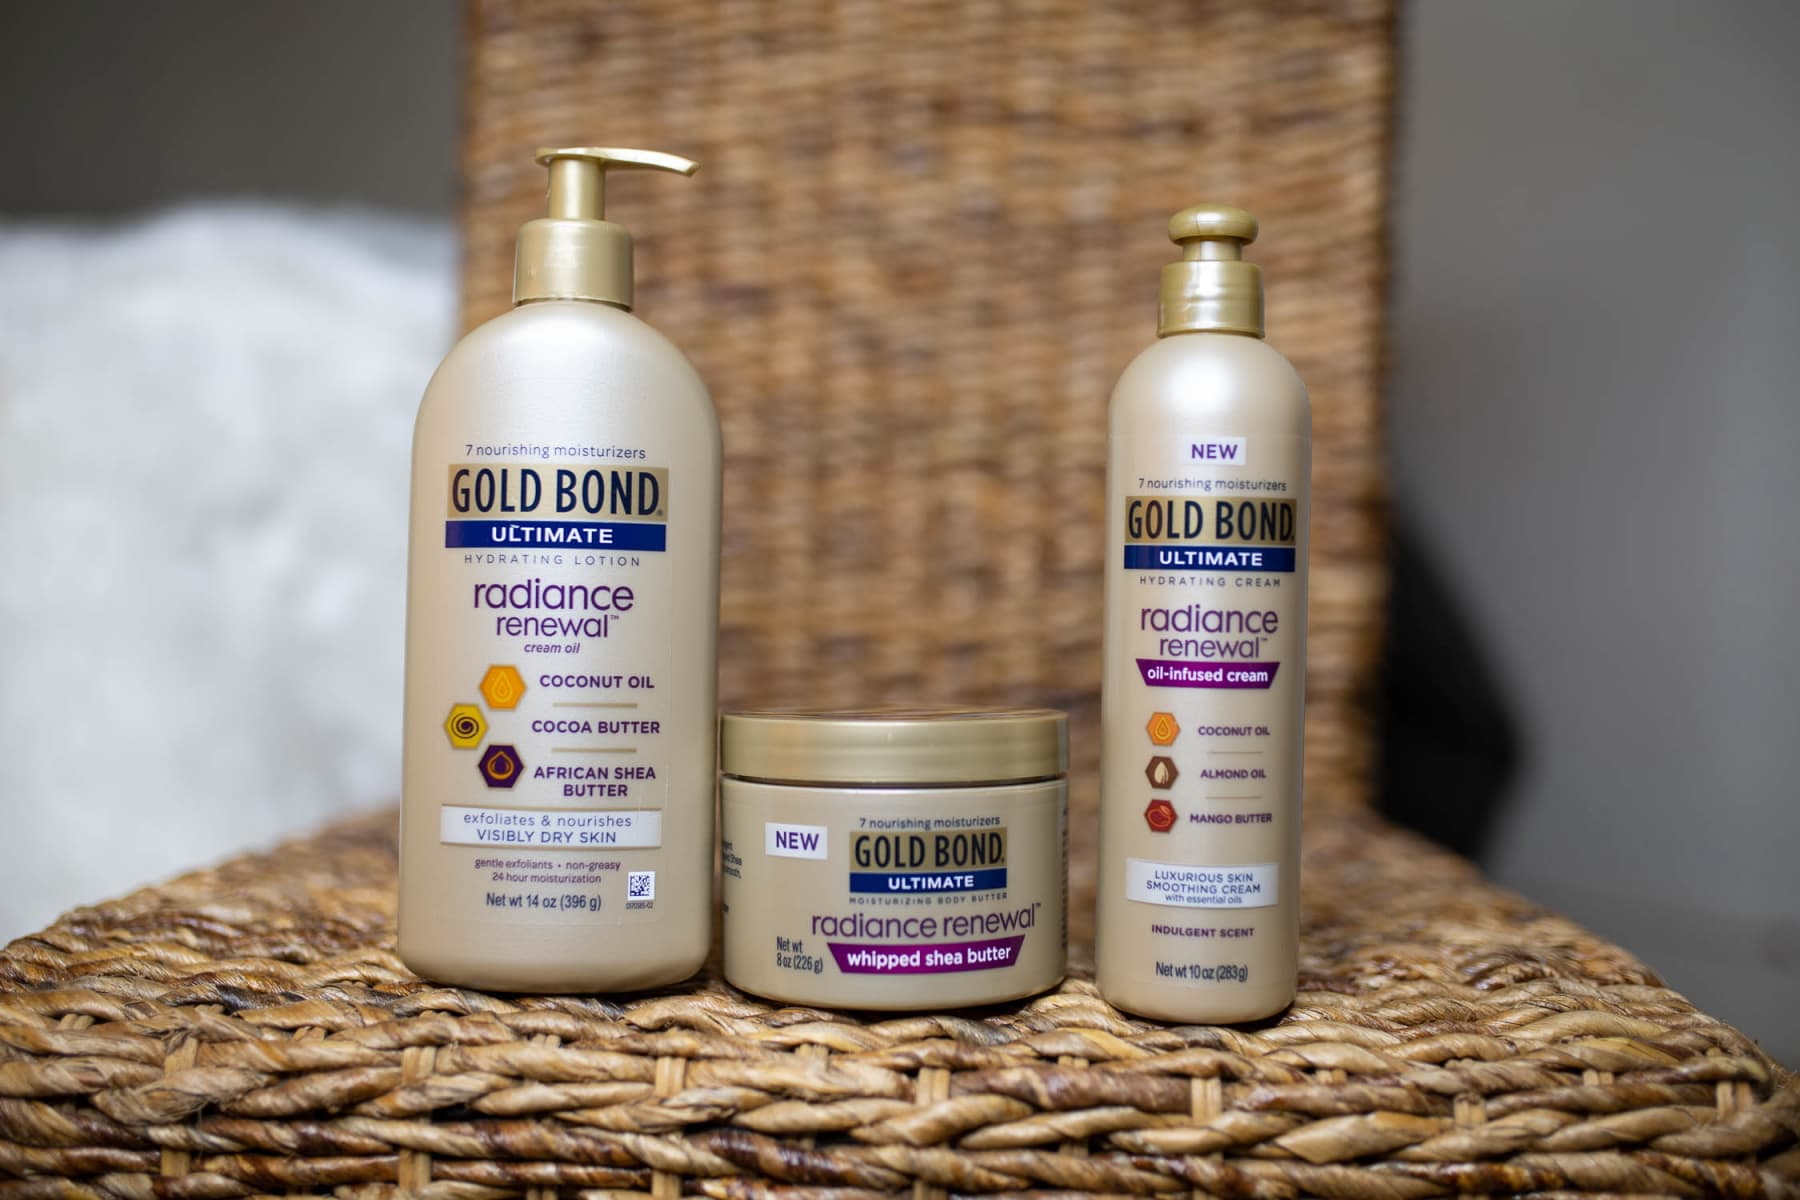 Gold Bond Radiance Renewal Review: The ULTIMATE Hydration?